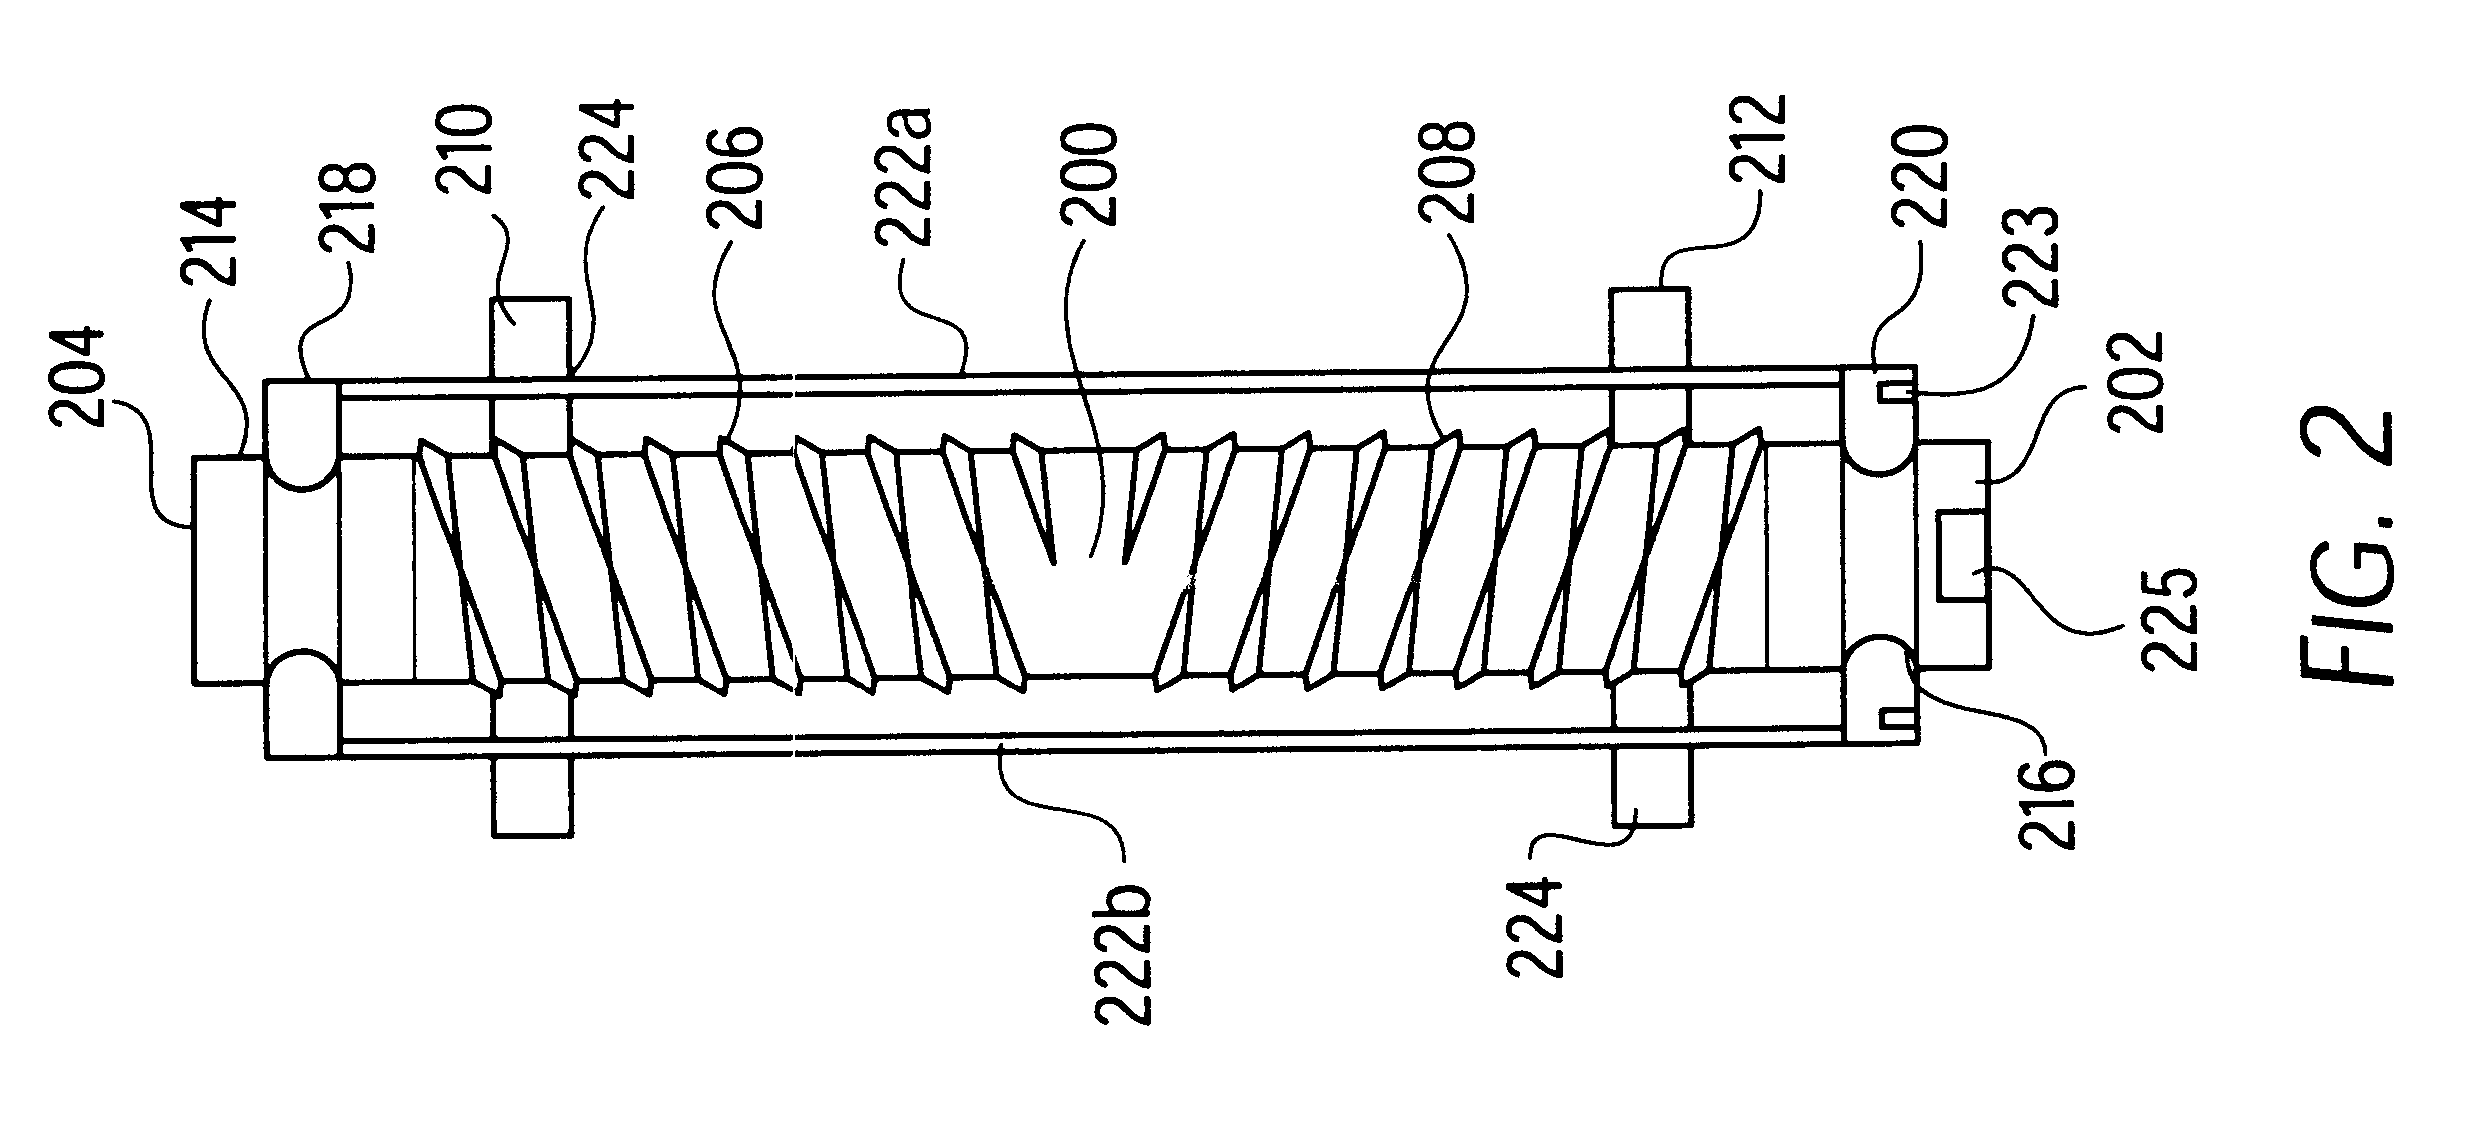 Vessel and lumen expander attachment for use with an electromechanical driver device